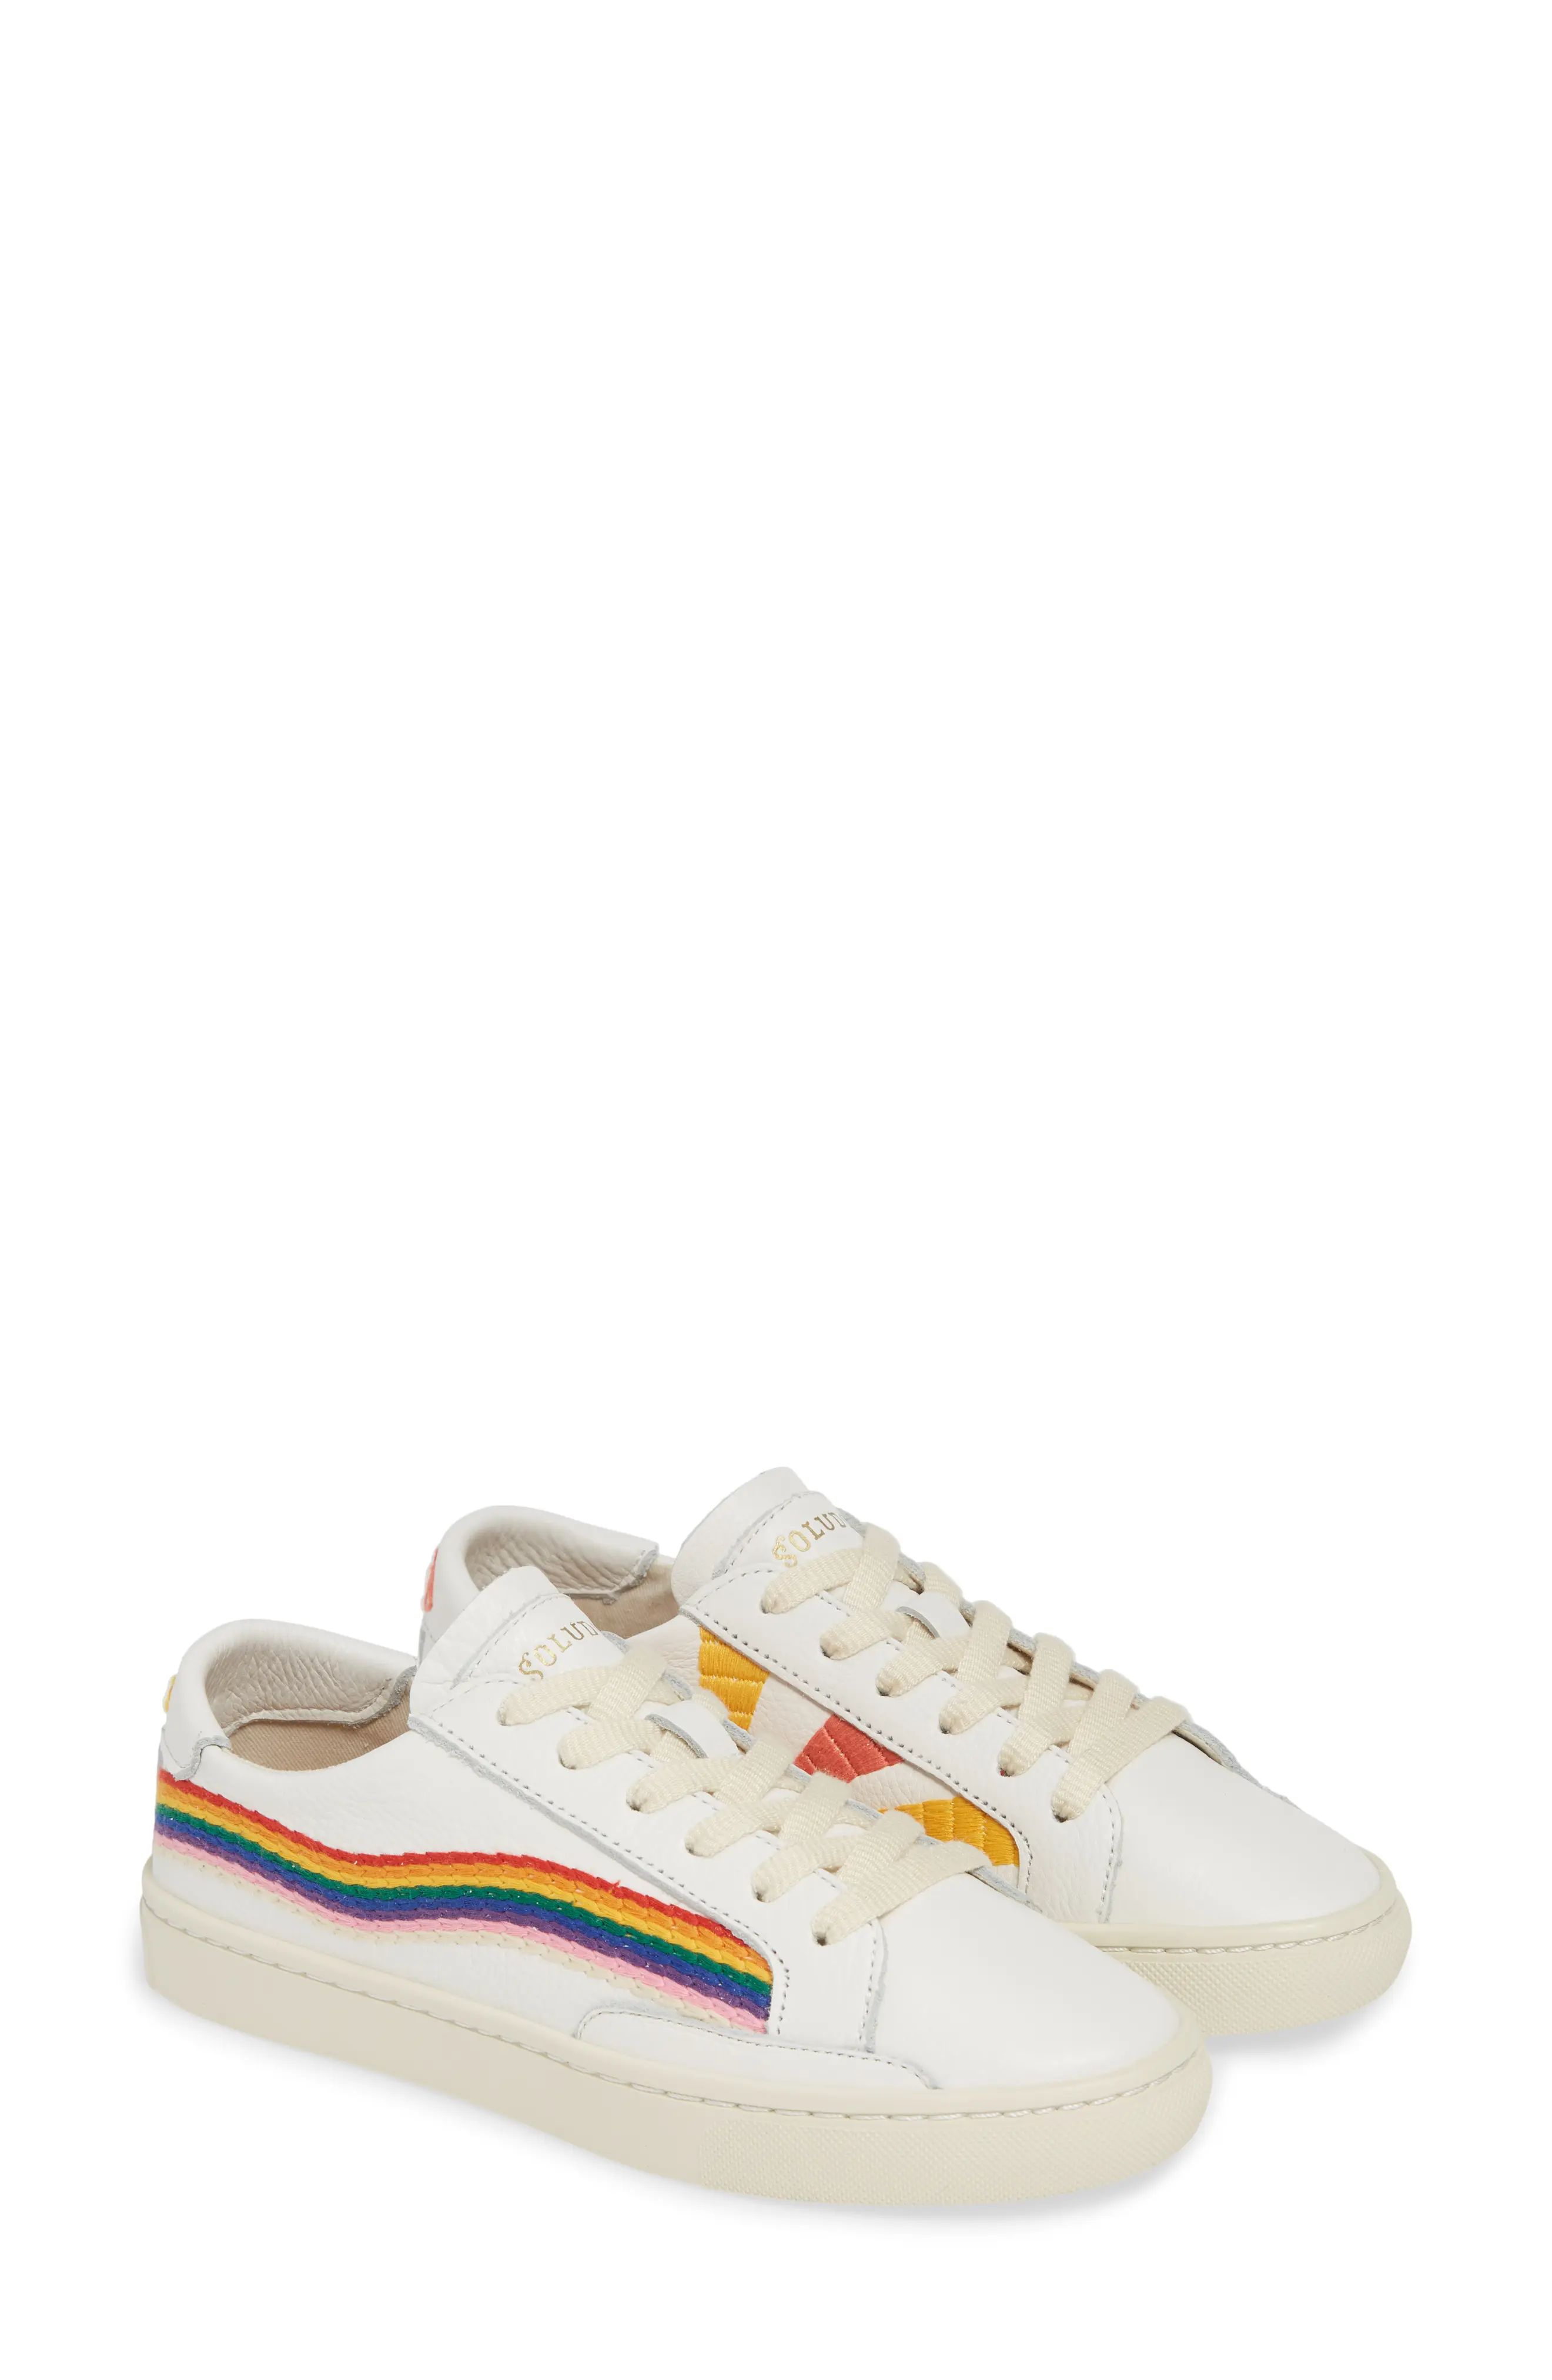 Soludos Rainbow Wave Sneaker in White at Nordstrom, Size 11 | Nordstrom